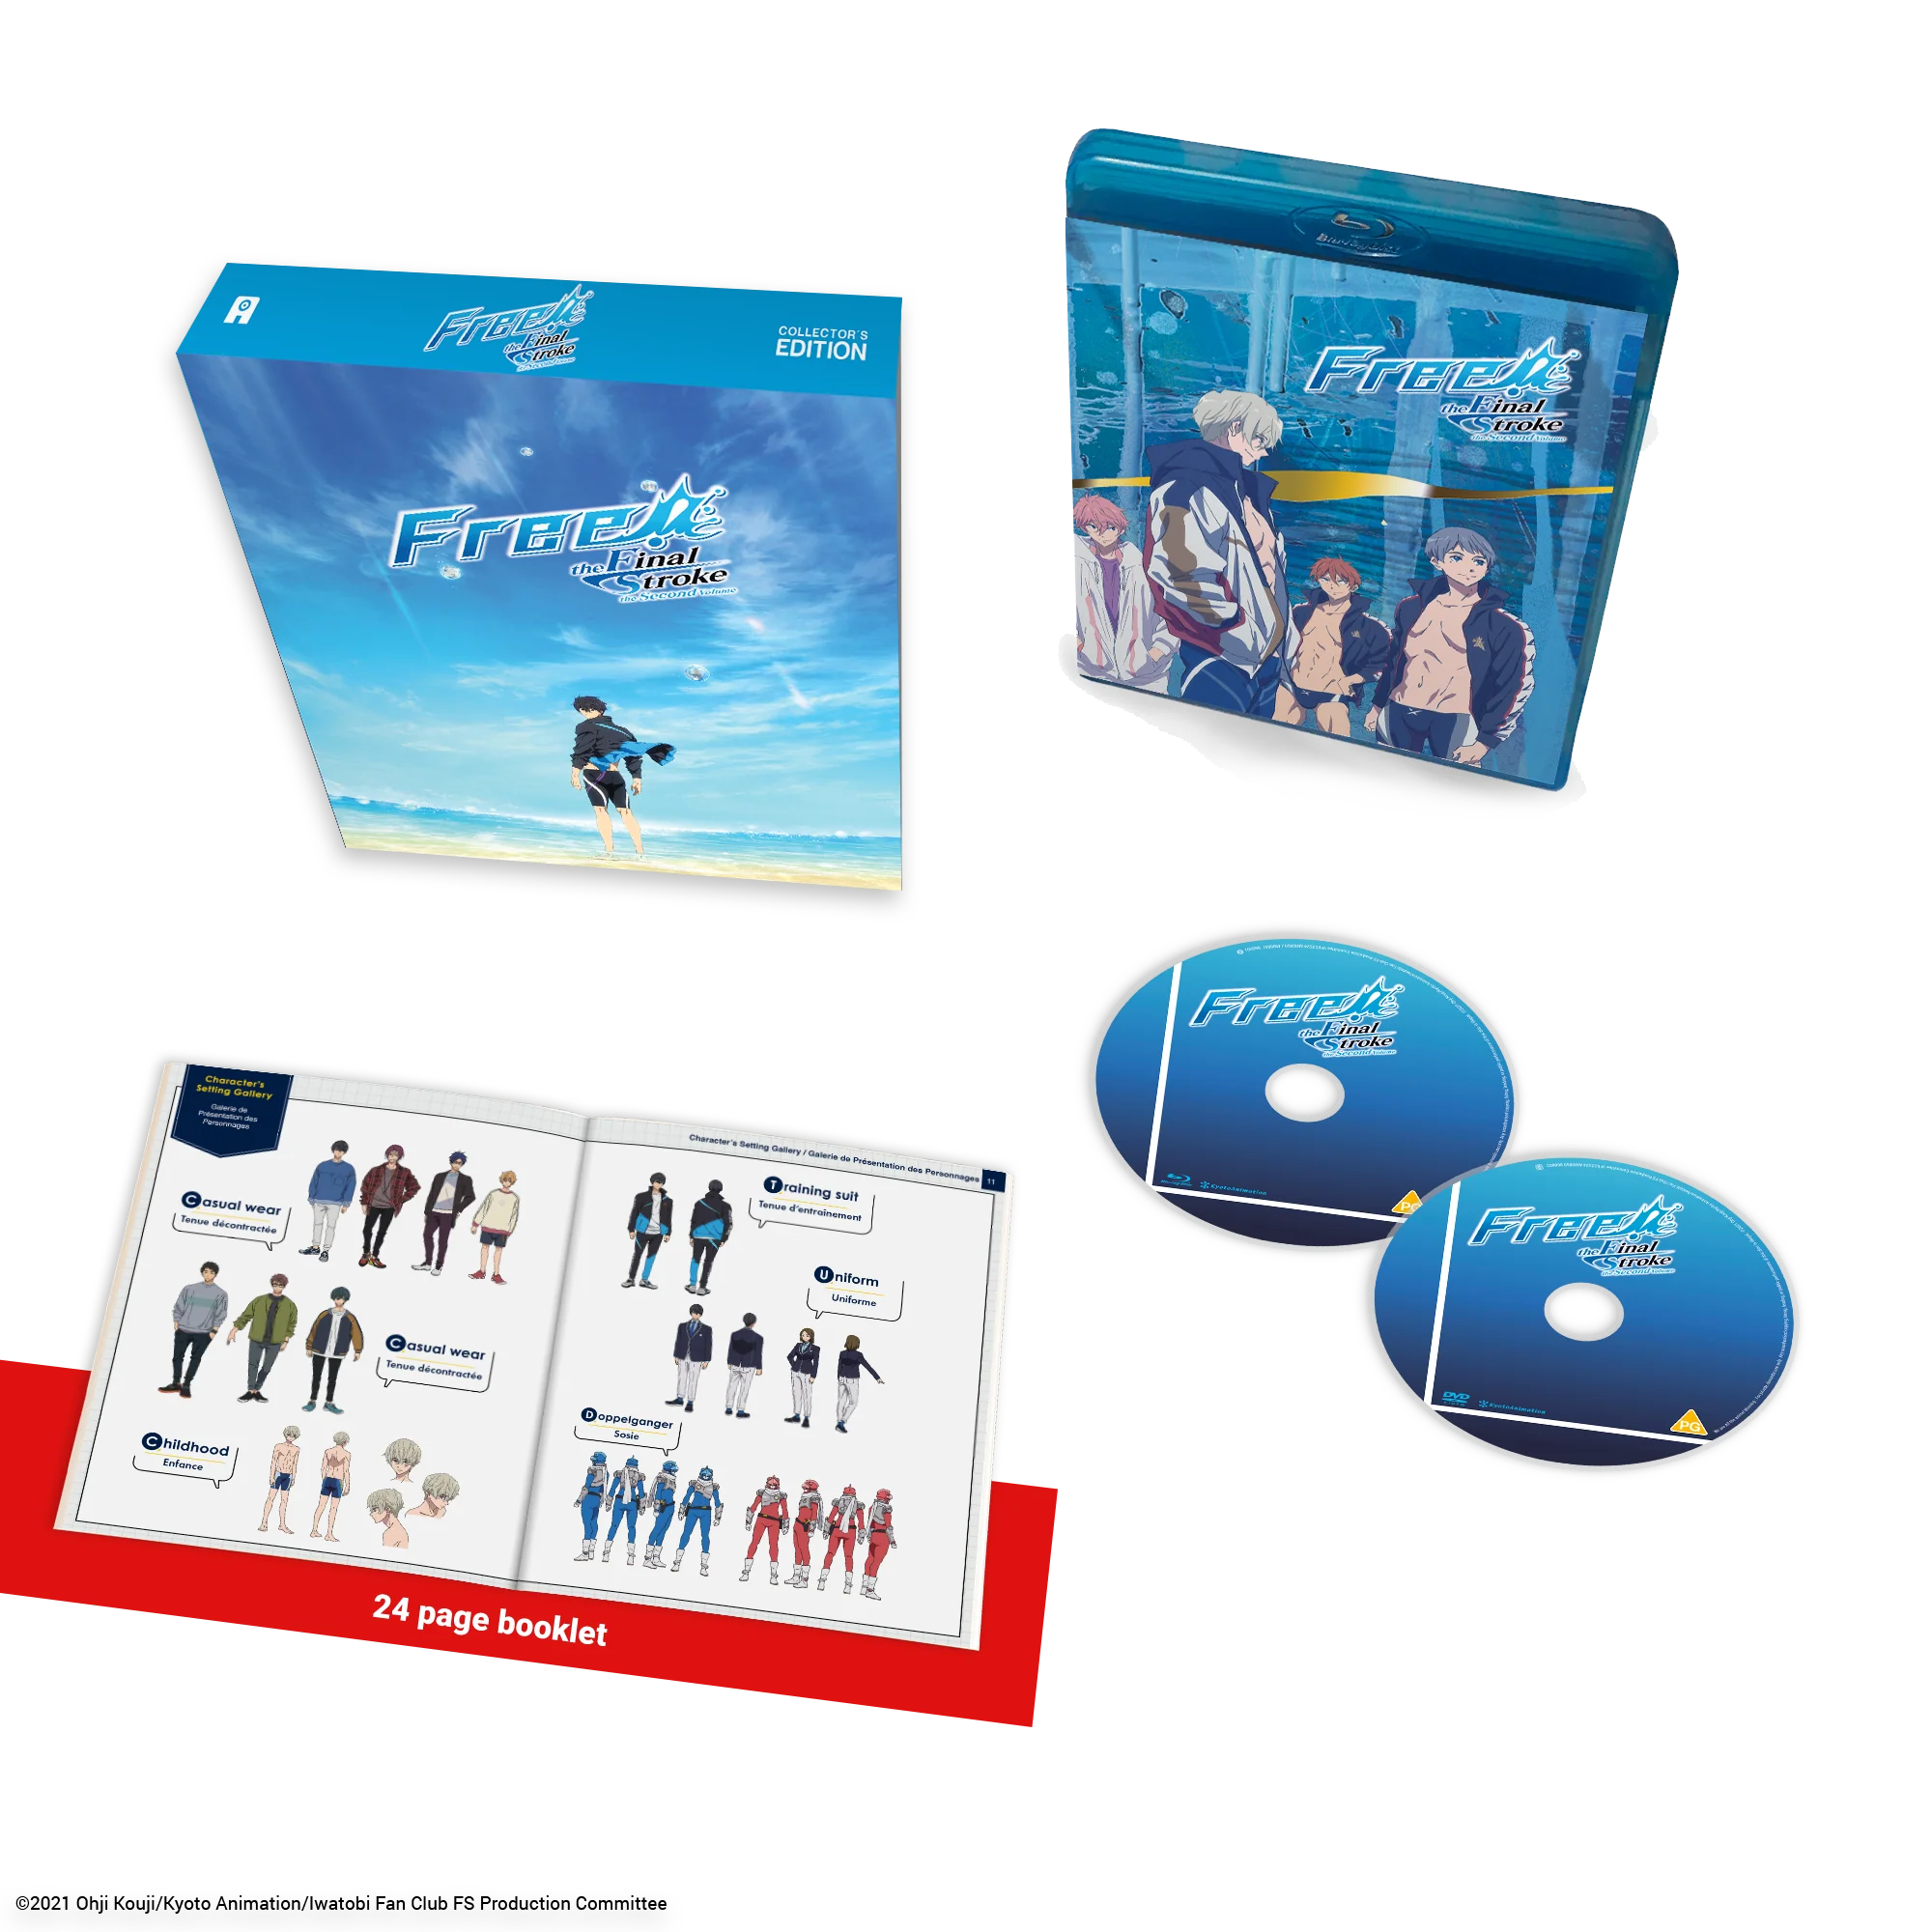 Uk Free The Final Stroke Volume 2 Collectors Edition Blu Ray 1